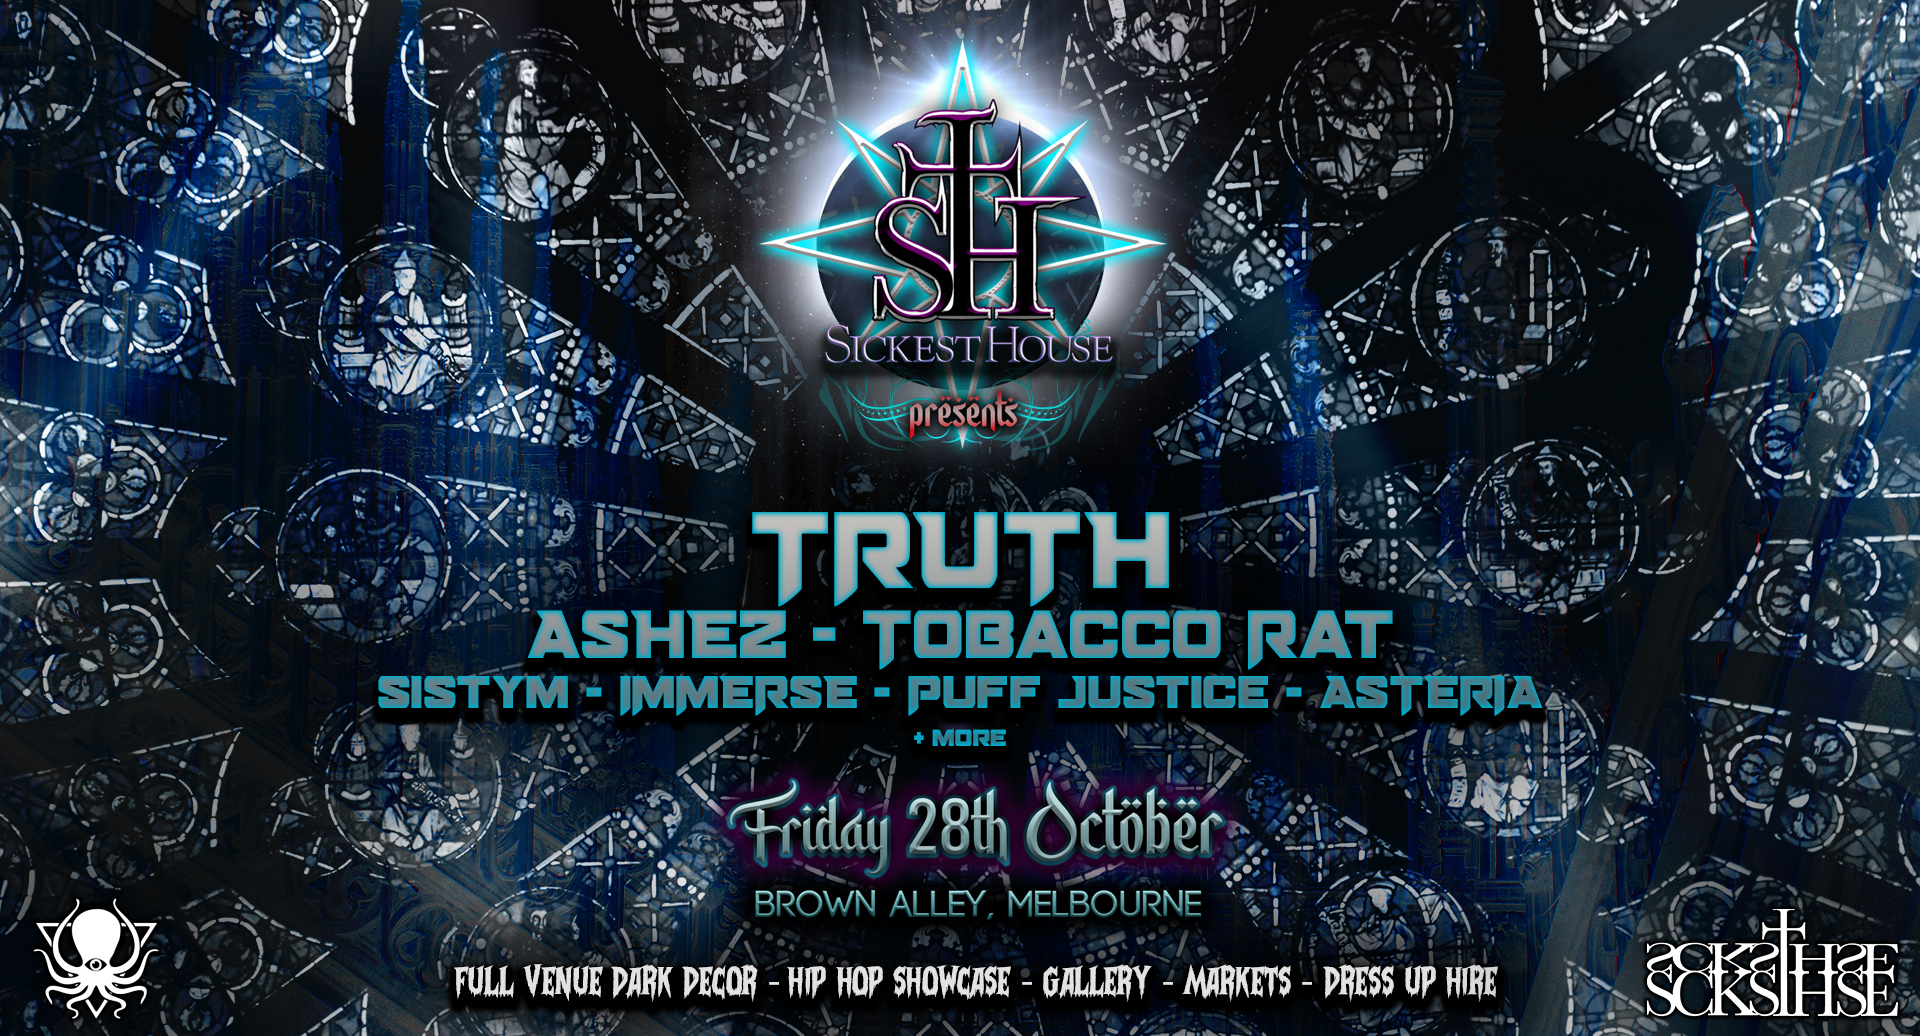 Sickest House Presents: - October 28th